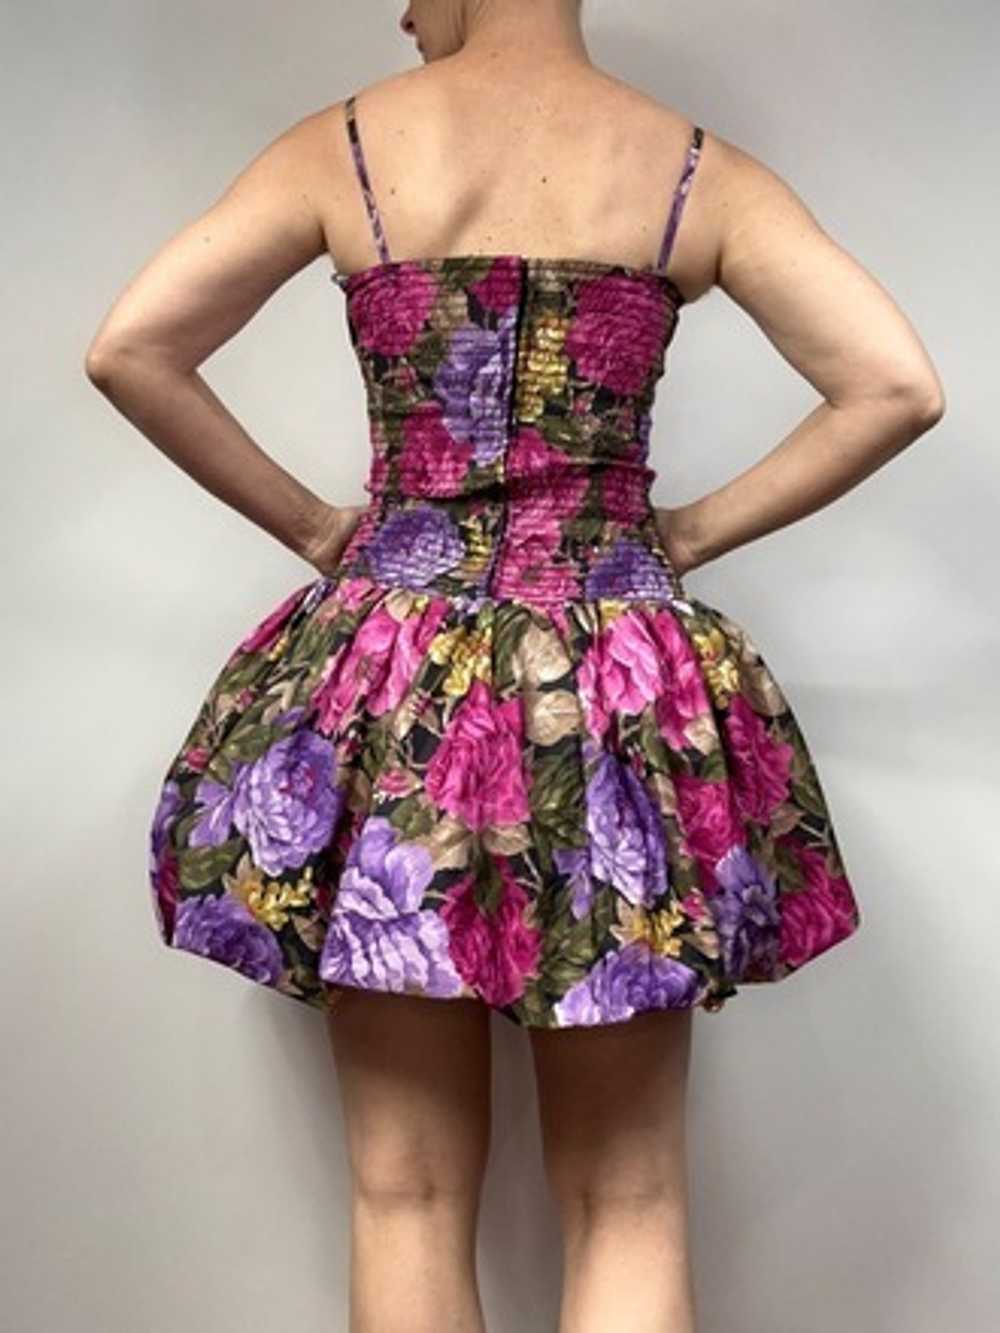 Pristine 90’s Floral Balloon Skirt Party Dress - image 4